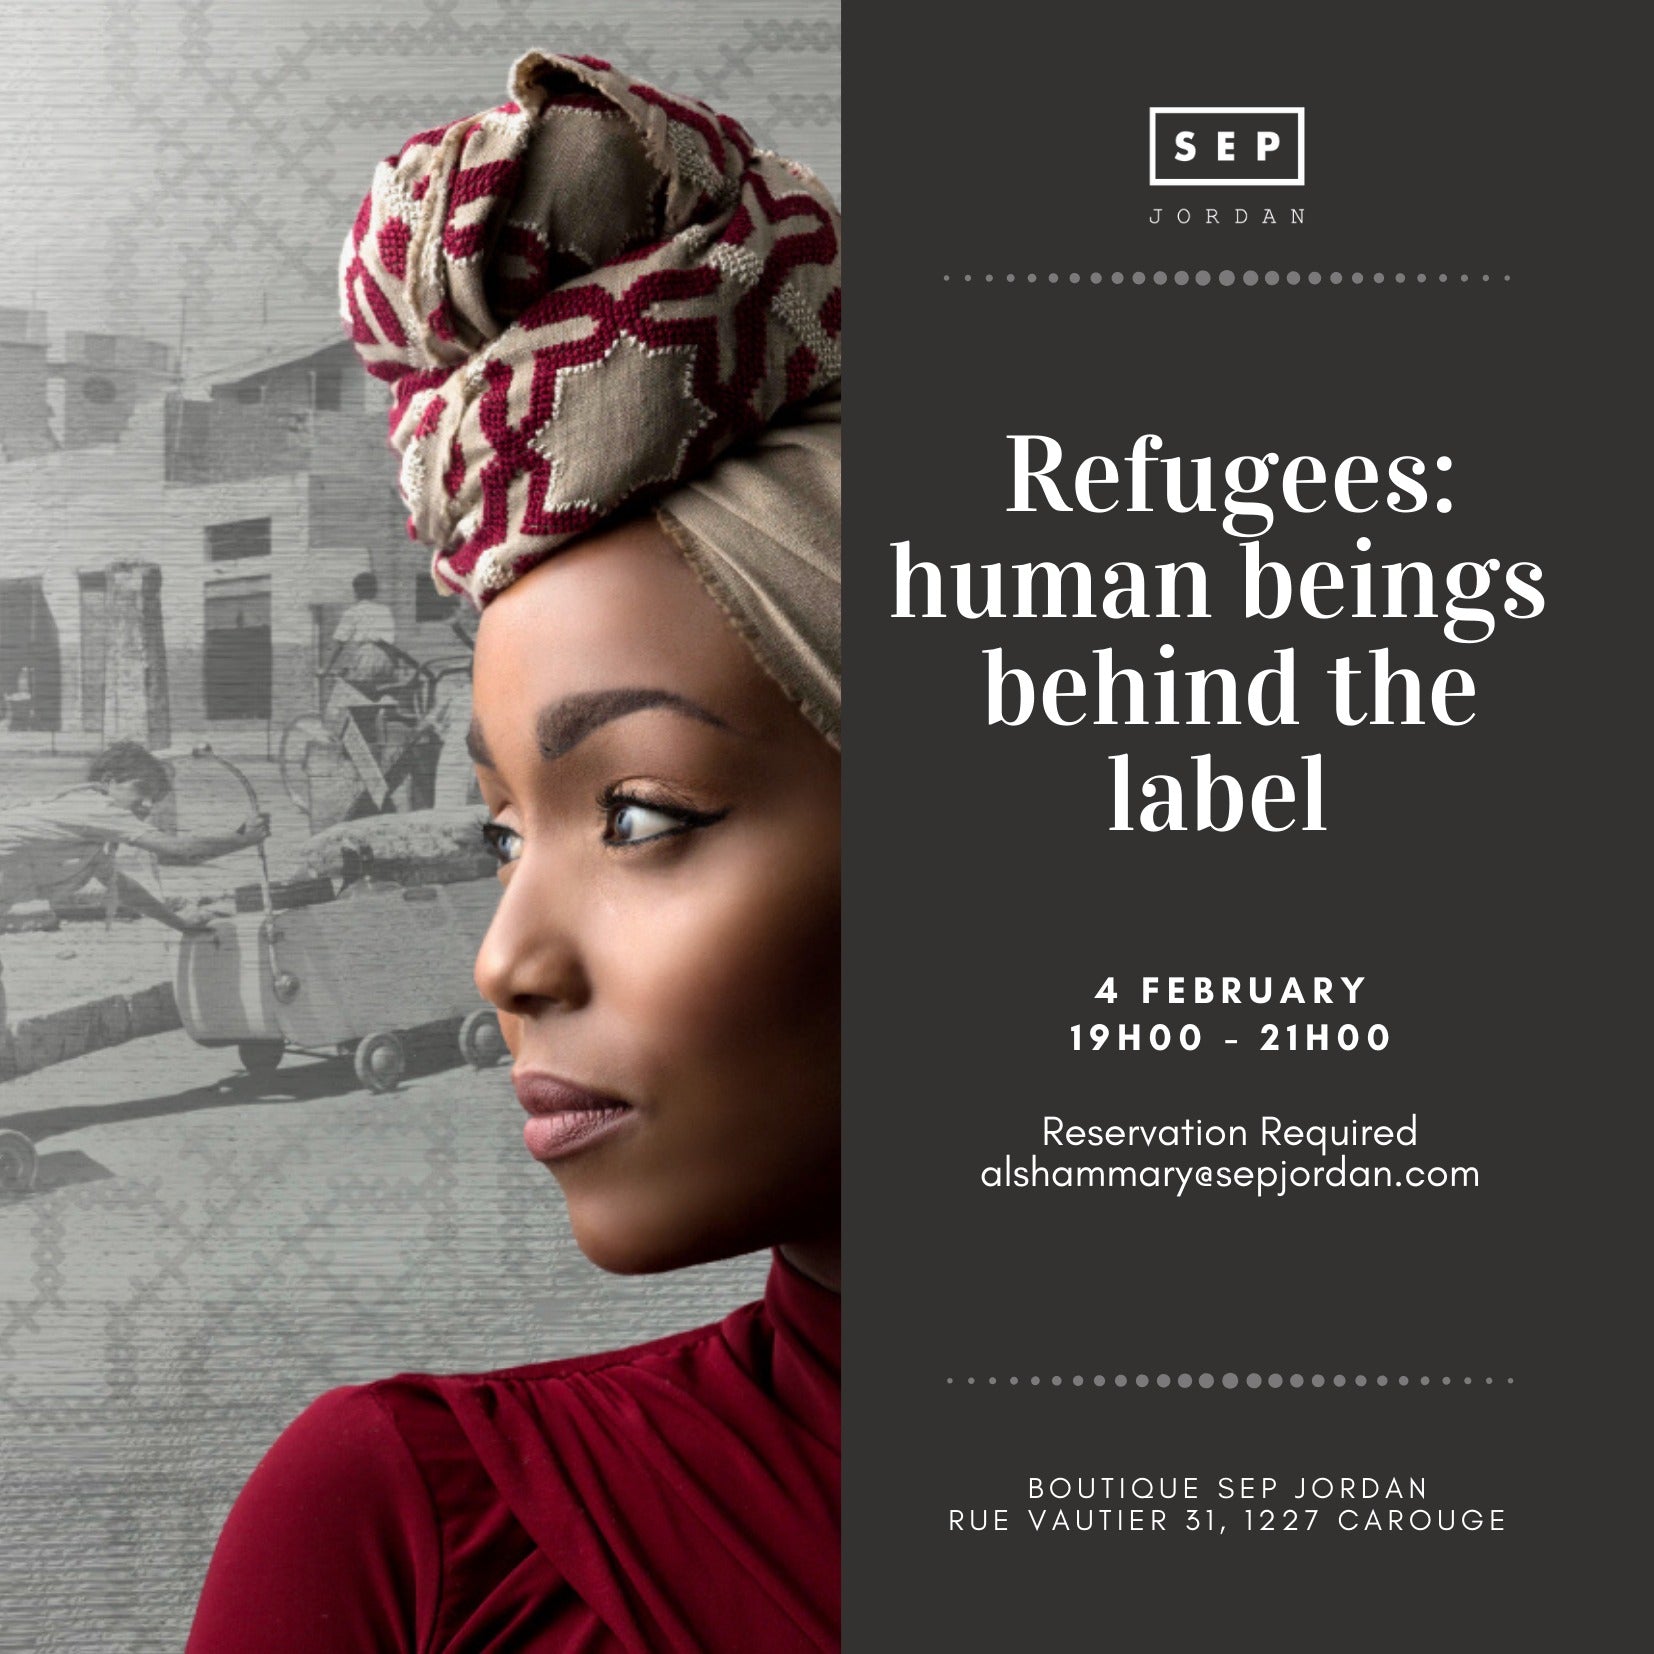 REFUGEES: HUMAN BEINGS BEHIND THE LABEL